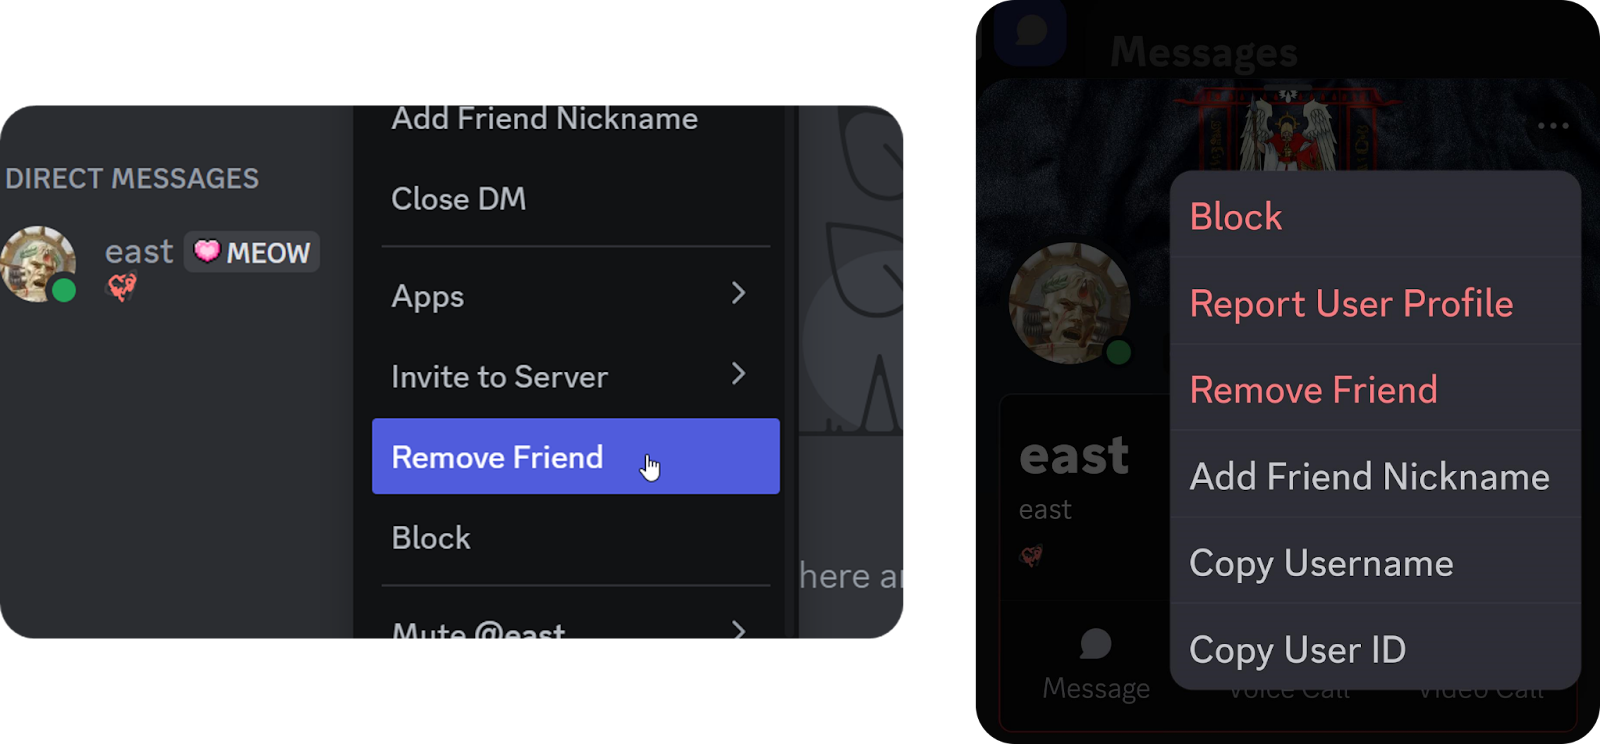 Desktop and mobile versions of removing a friend